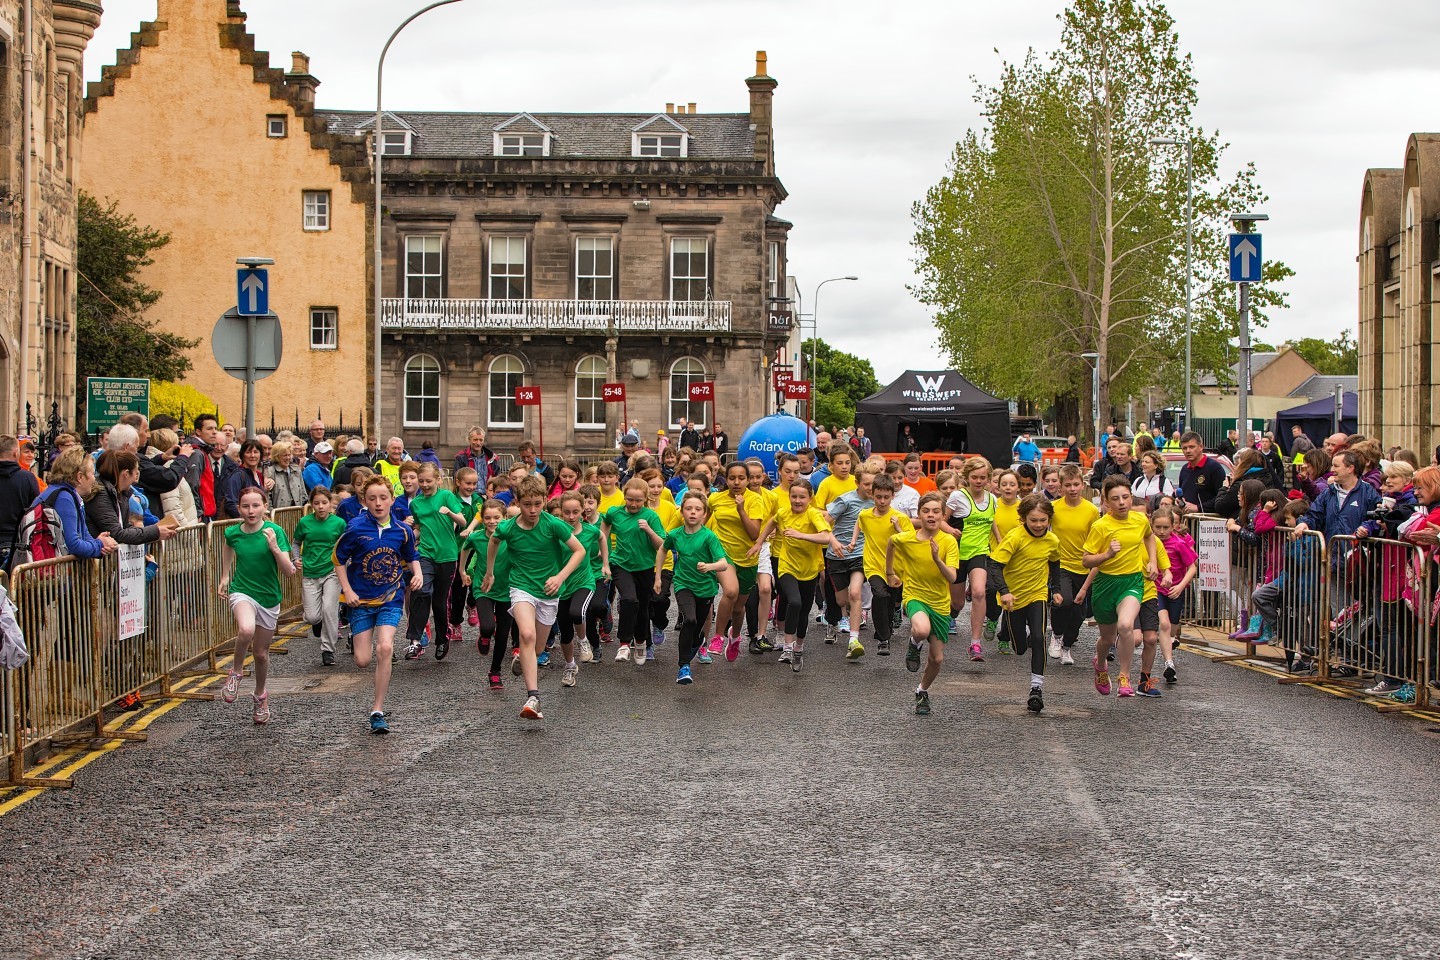 This is the start of the childrens race in Elgin